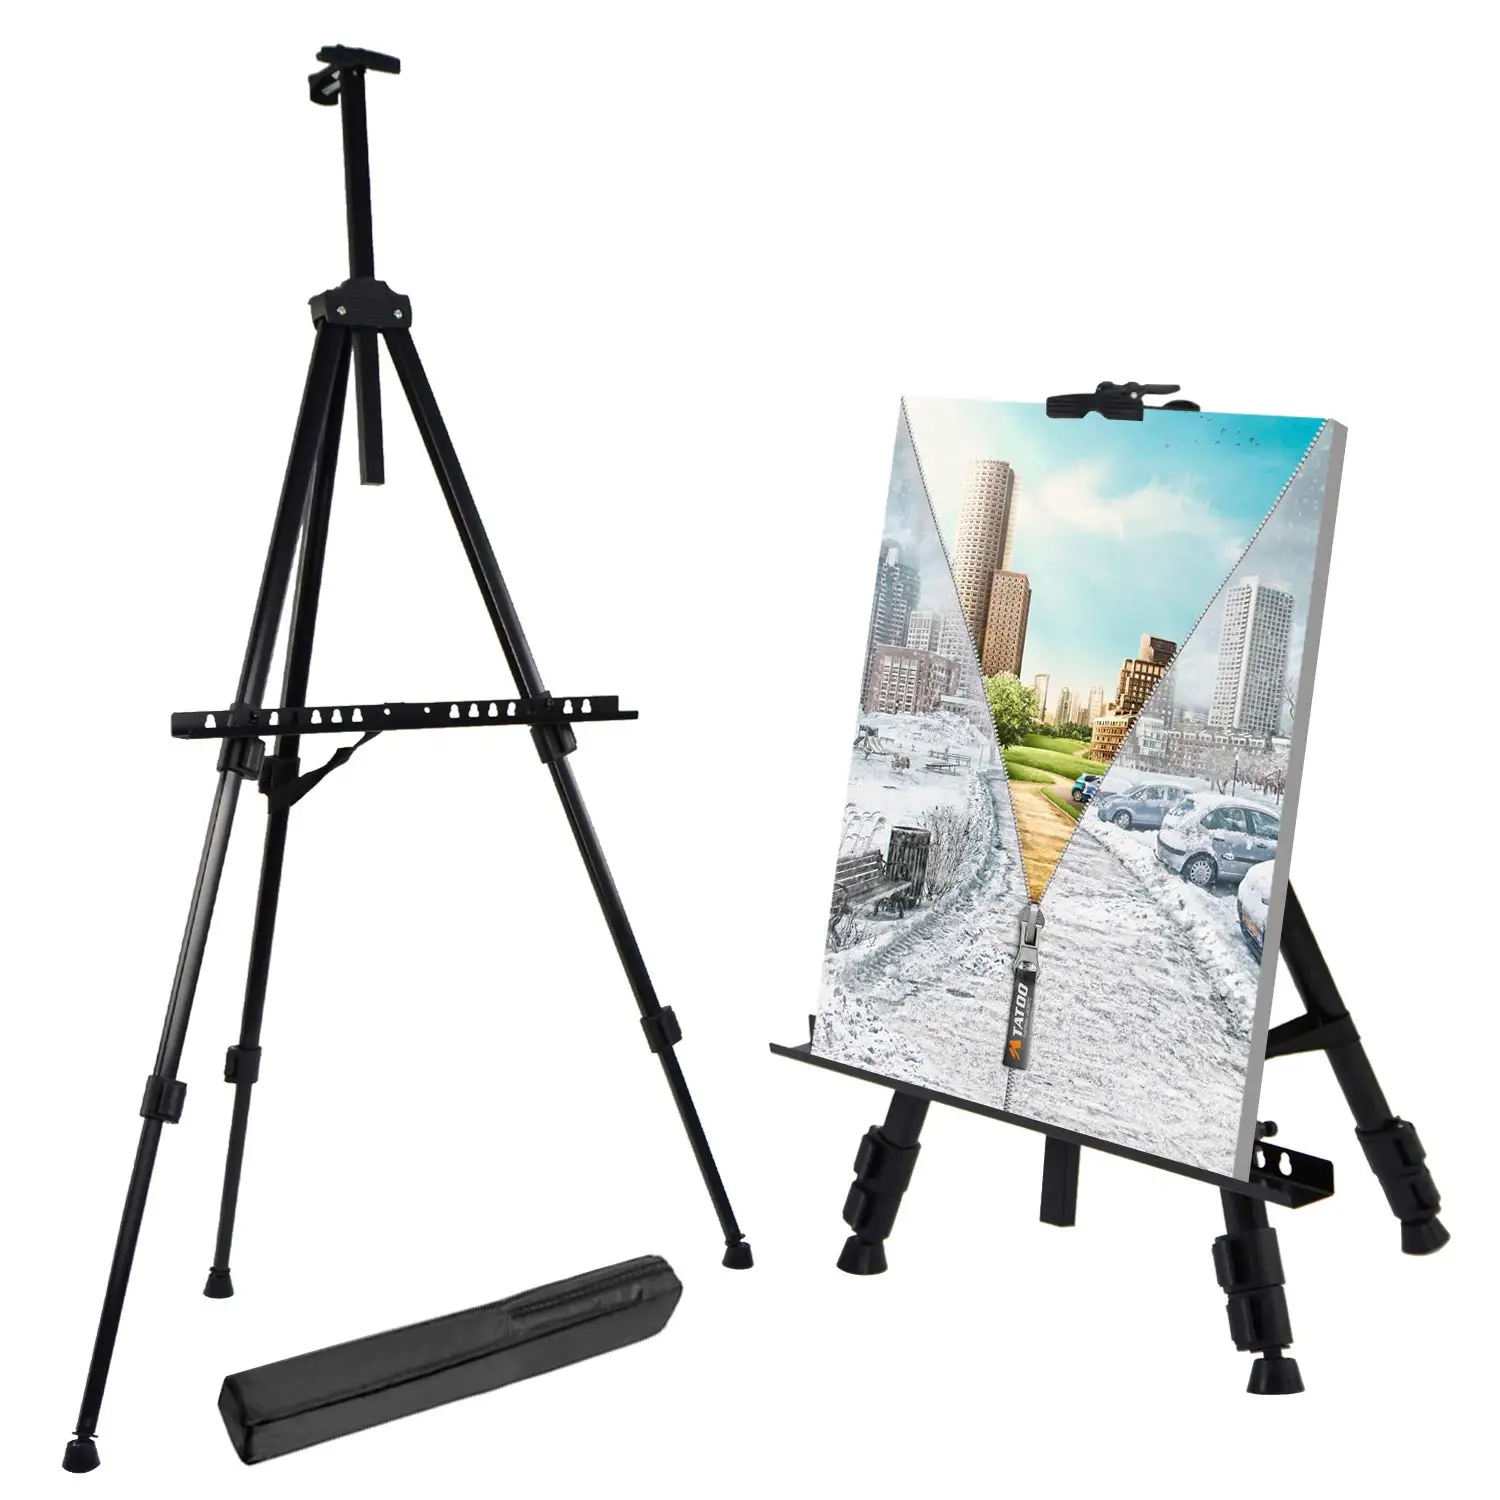 Canvas Board Art Stand For Painting Extra Thick Aluminum Metal Tripod Display Easel 21 zu 66 Inches Adjustable Height